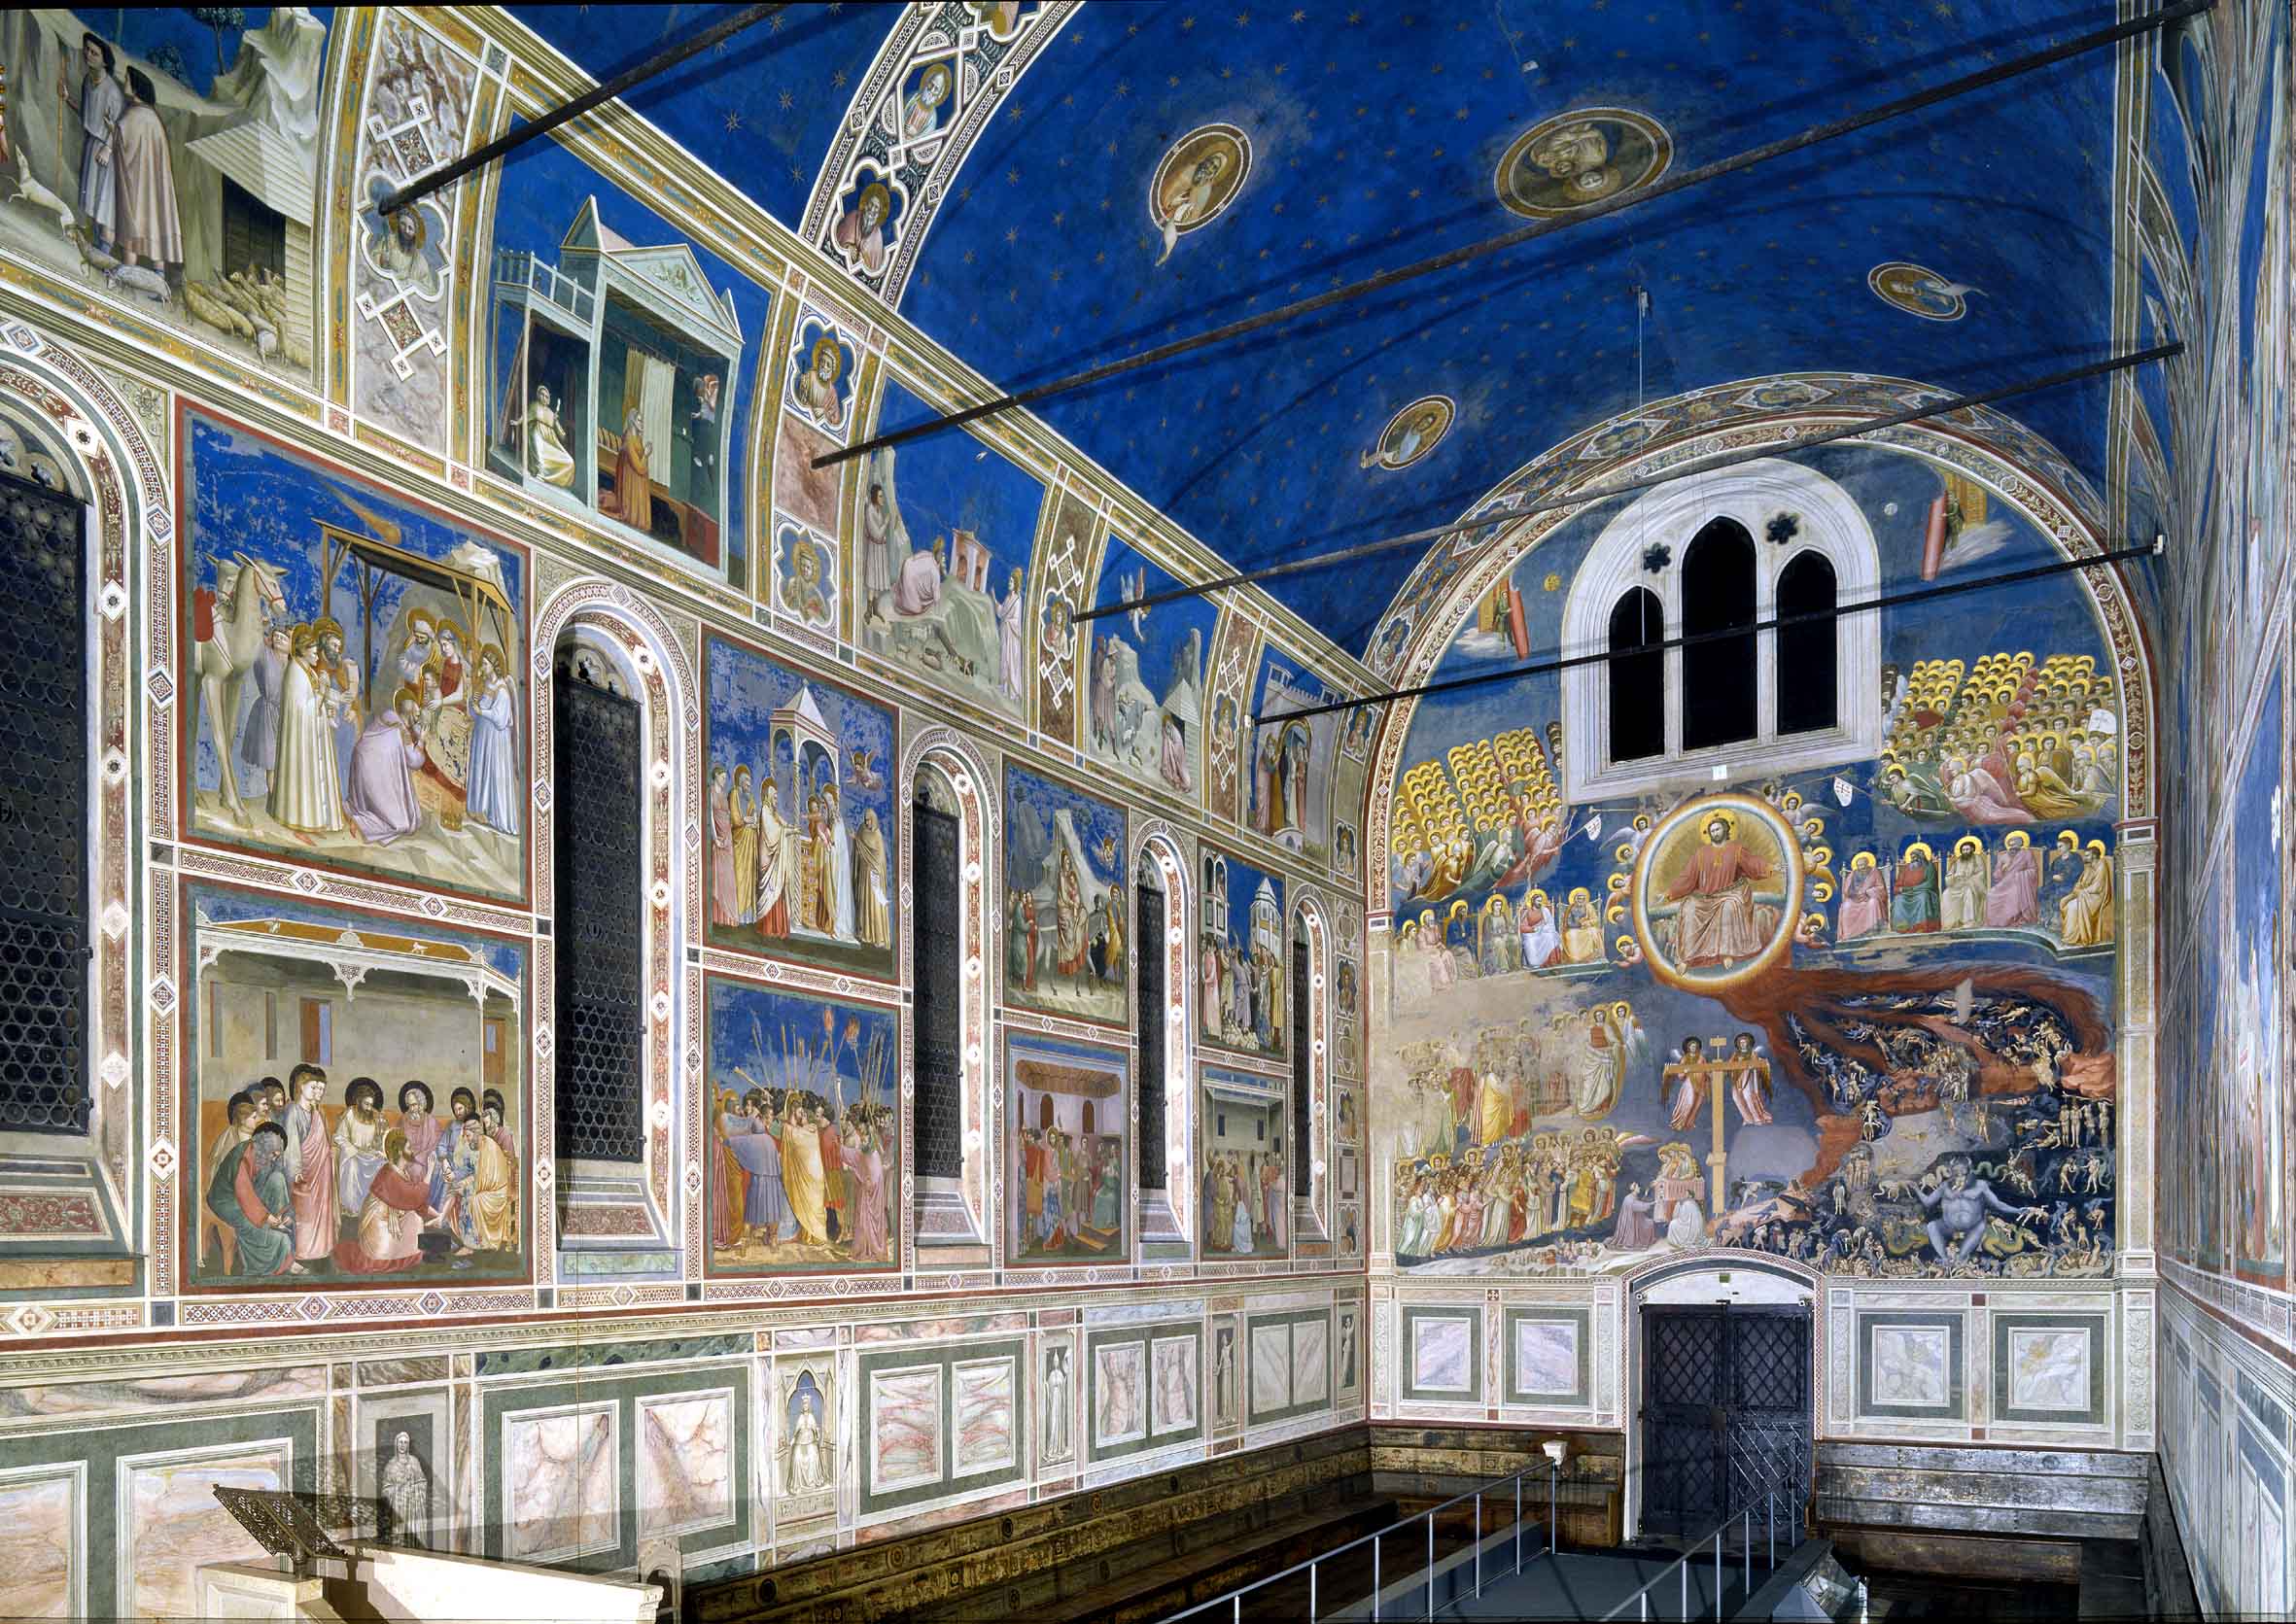 Giotto, life and works of the artist who 